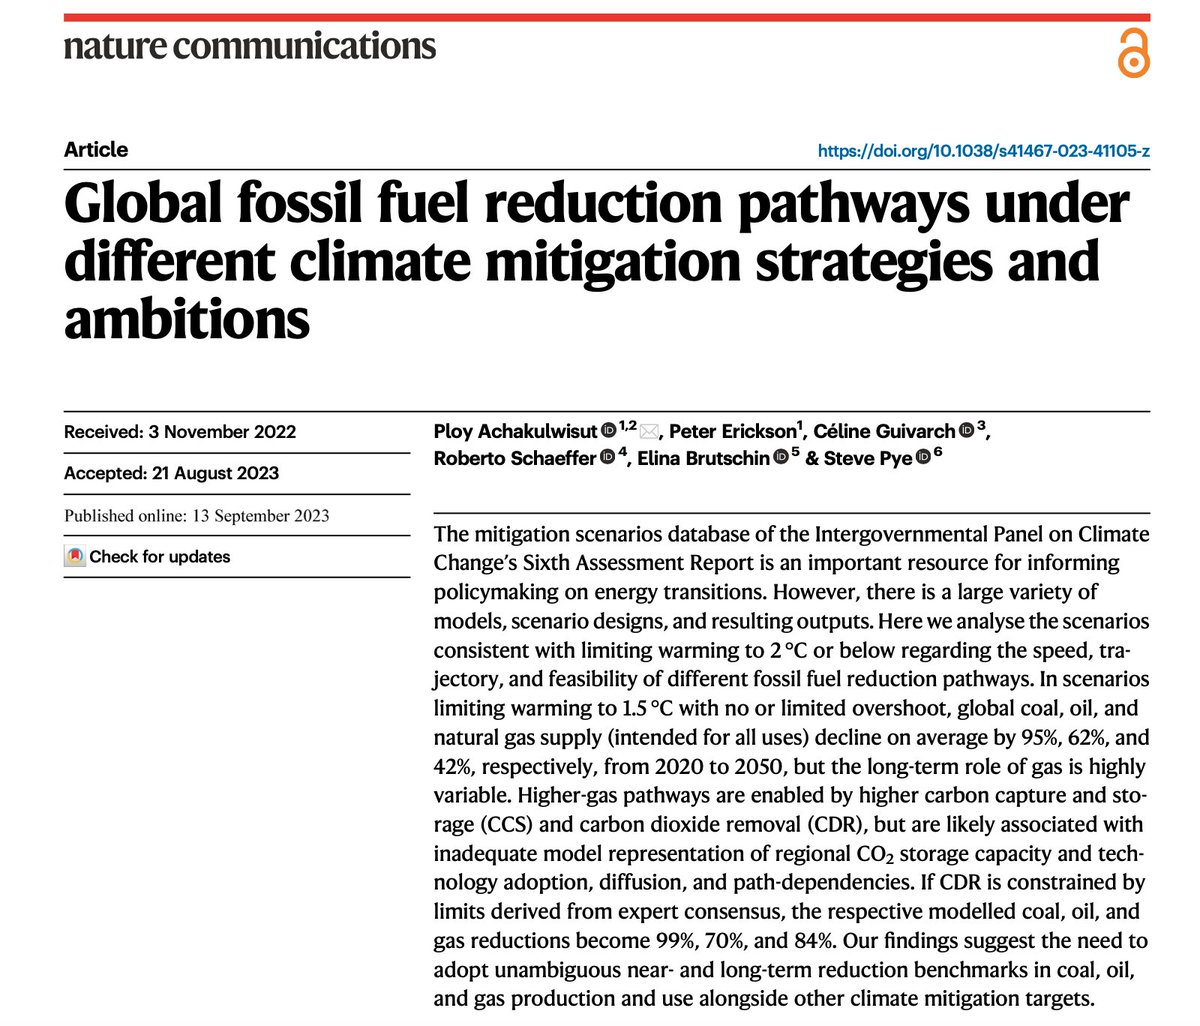 Lots of interest at #COP28 right now on Paris-aligned fossil fuel reduction pathways so thought I'd re-share three relevant publications I worked on this year: 1) @NatureComms paper analyzing 535 scenarios from the IPCC AR6. 2) 2023 #ProductionGap report 3) #10NewInsights